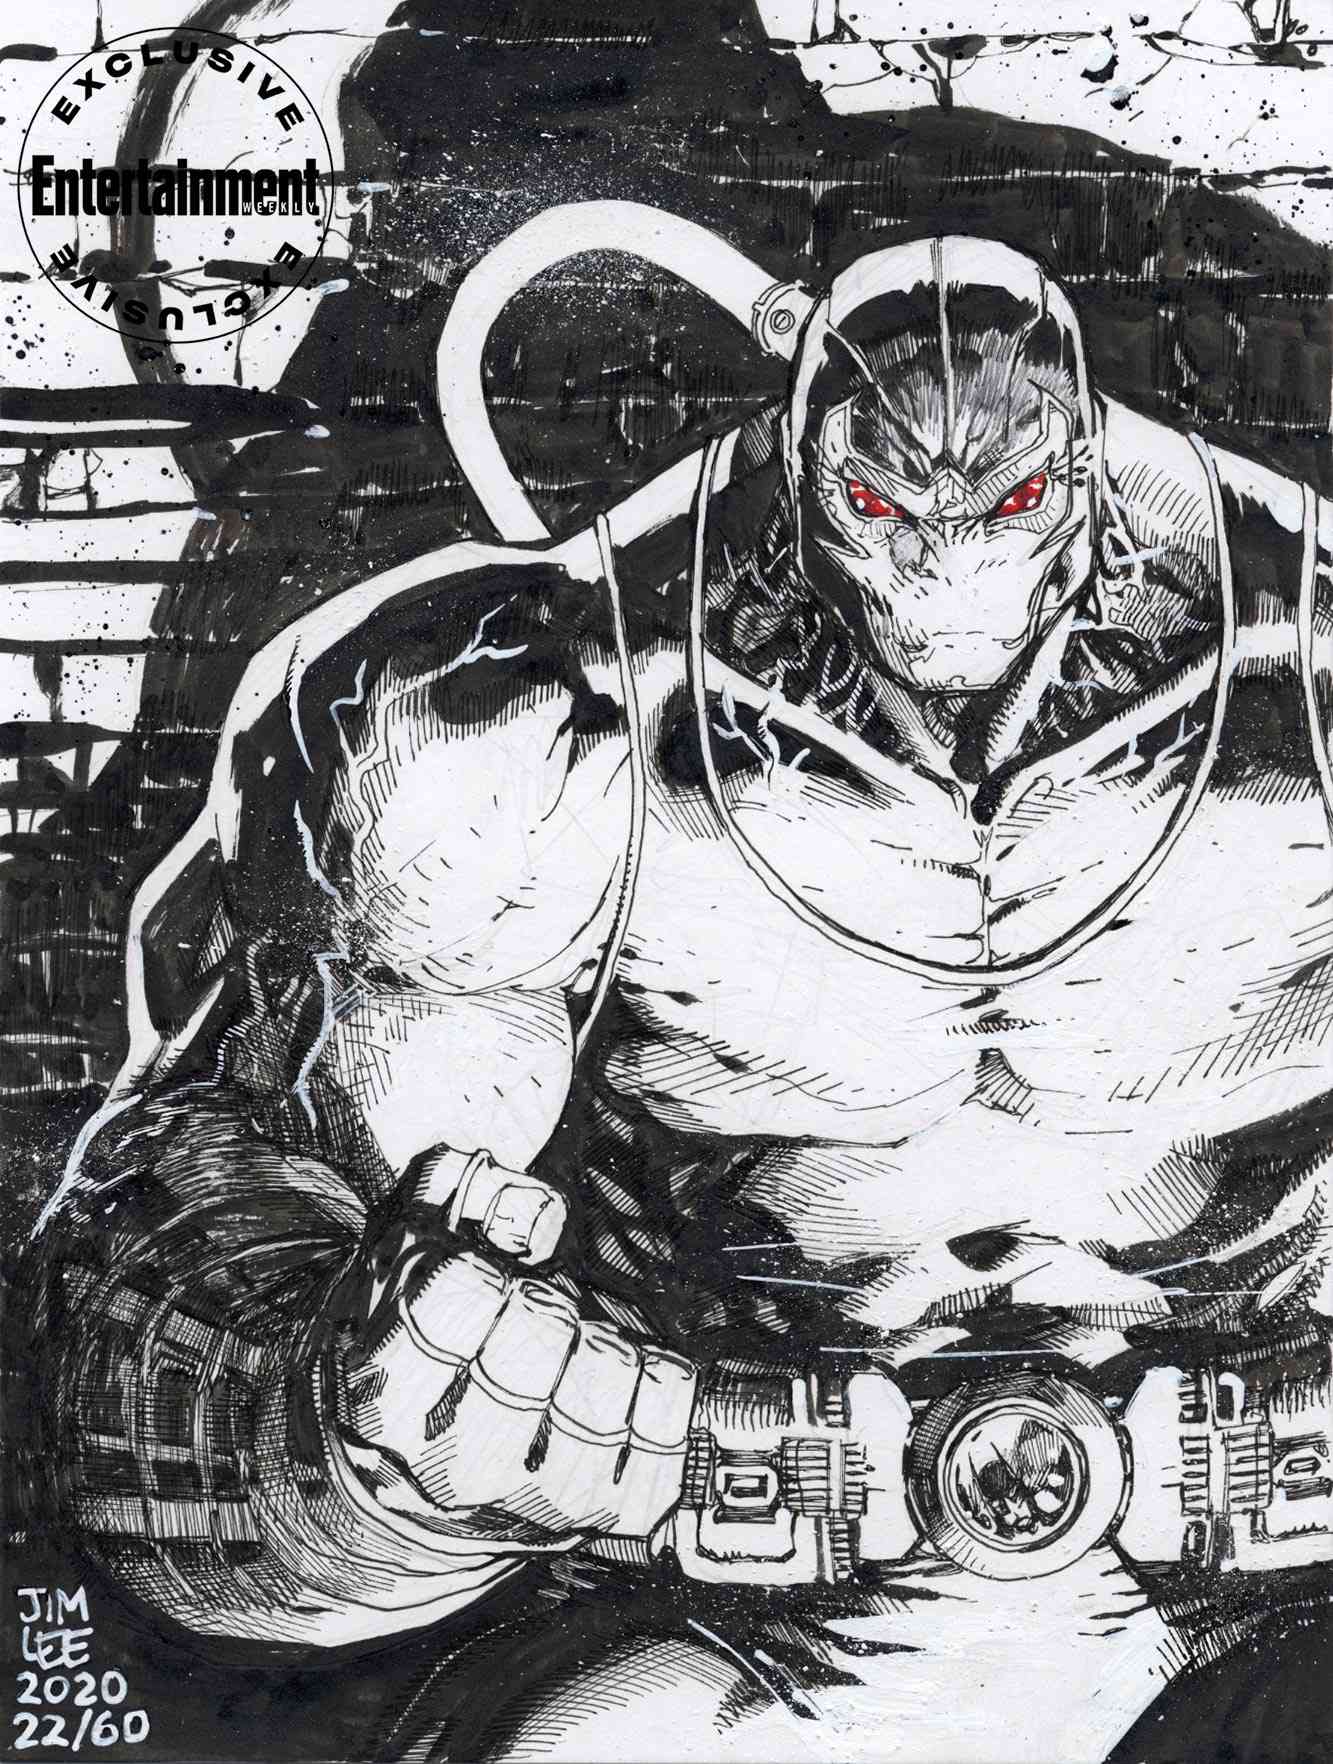 See Jim Lee's Bane sketch to raise money for comic shops 